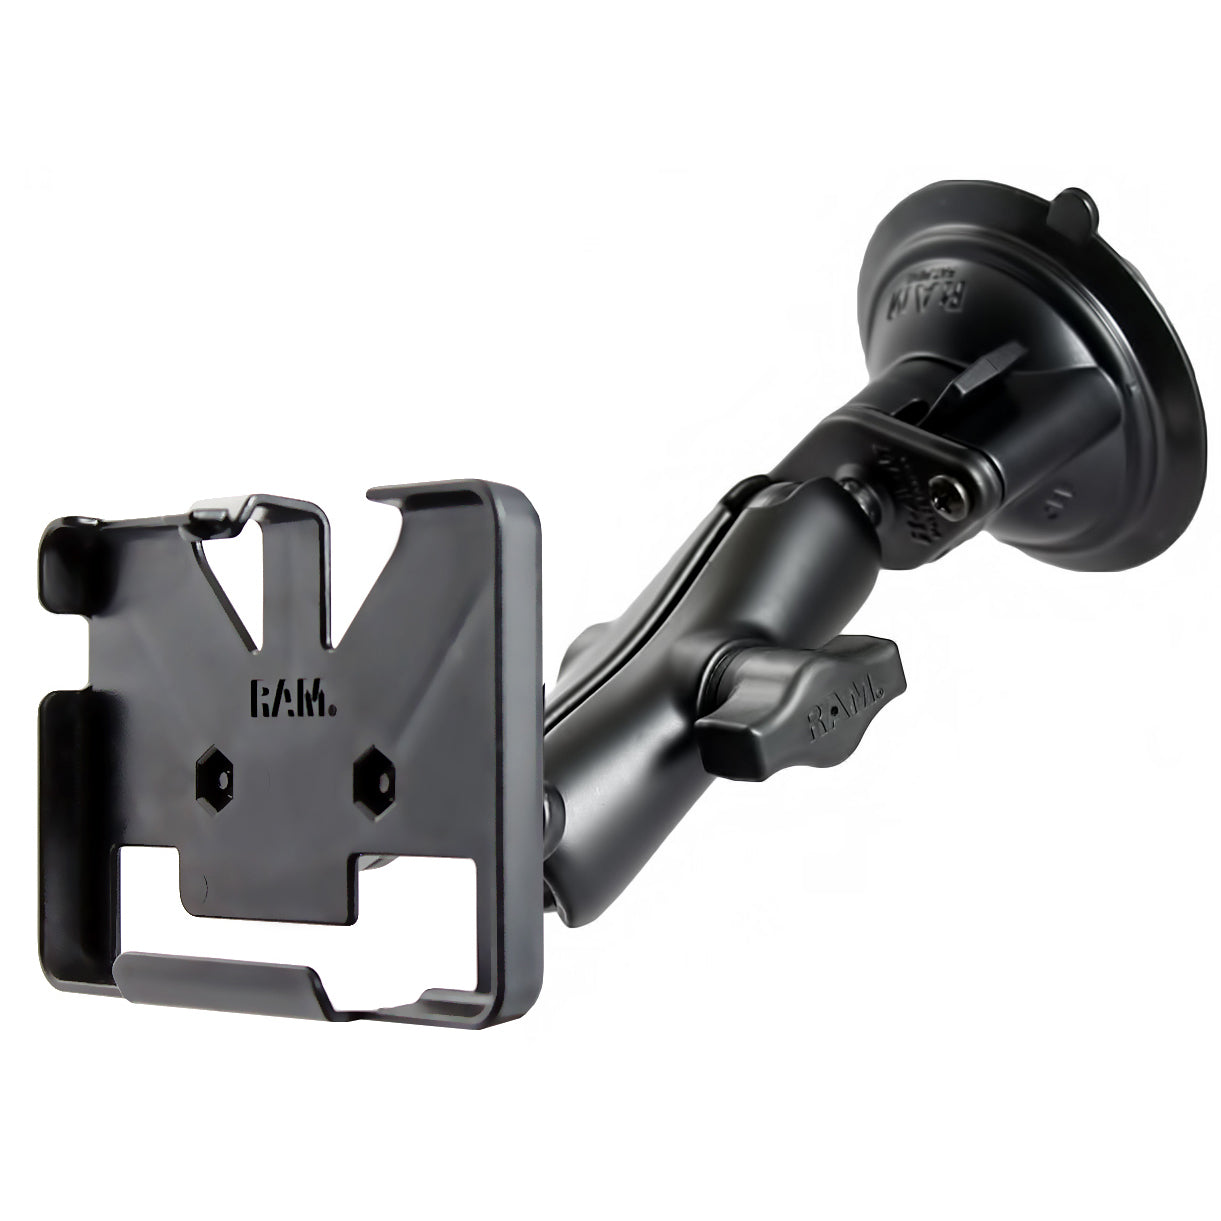 RAM® Twist-Lock™ Suction Cup Mount for Garmin nuvi 1440, 1490T + More ...